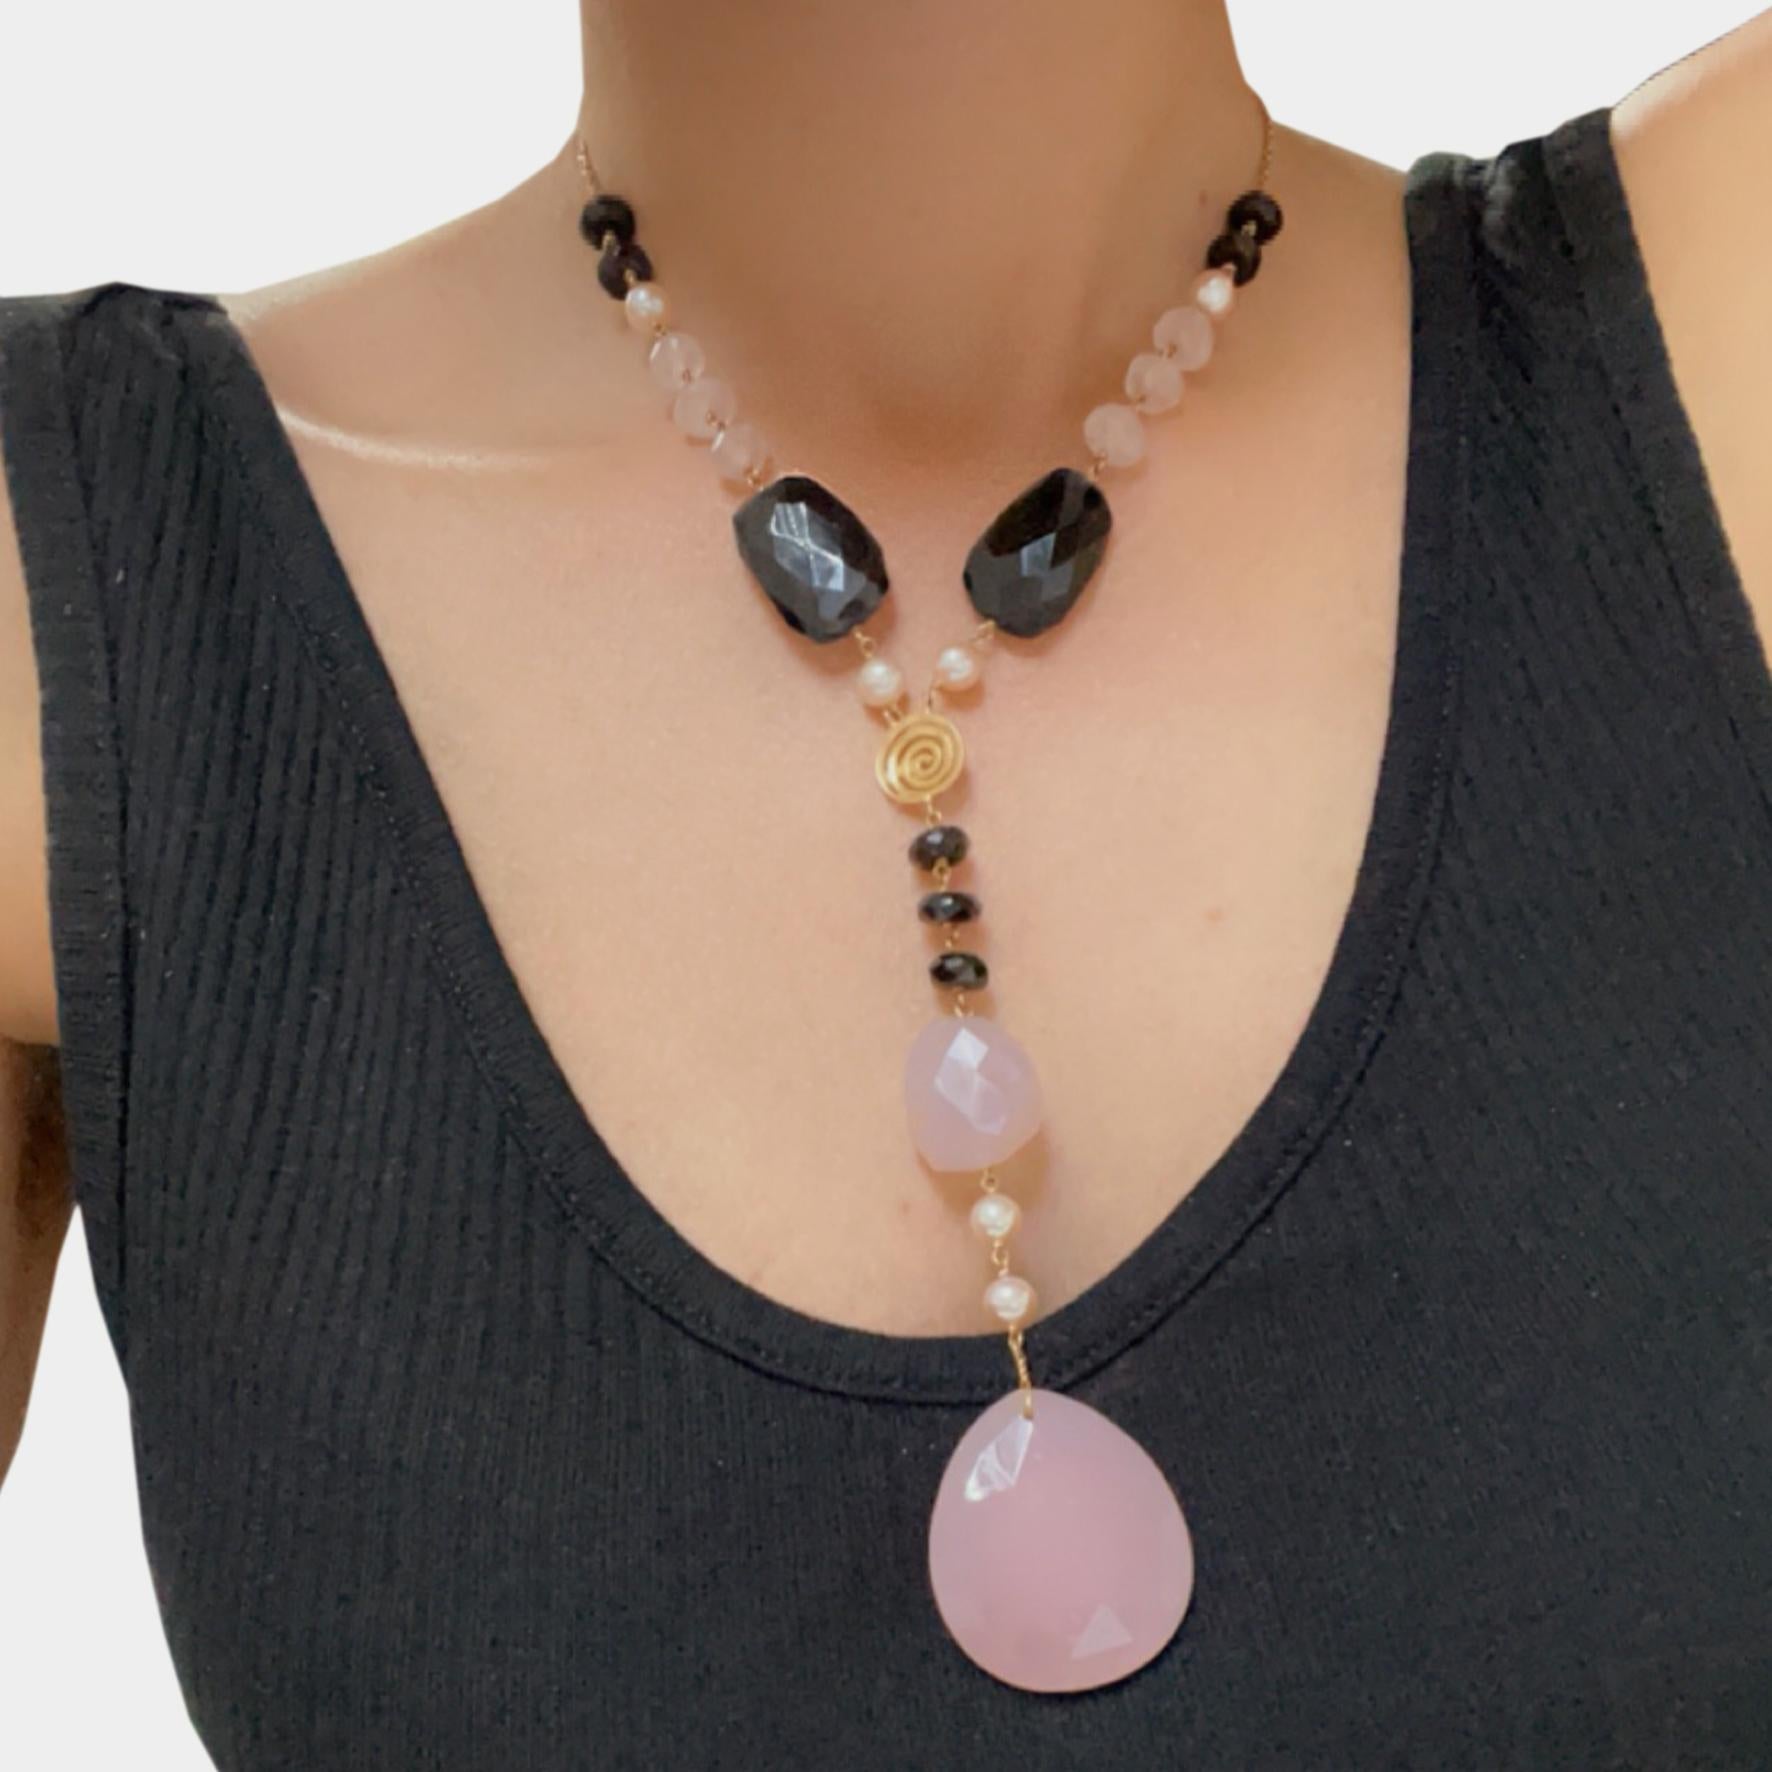 Brilliant Cut 18KTrose gold Lariat necklace w. Onyx, pearls, Pink Chalcedony and pink quartzes For Sale